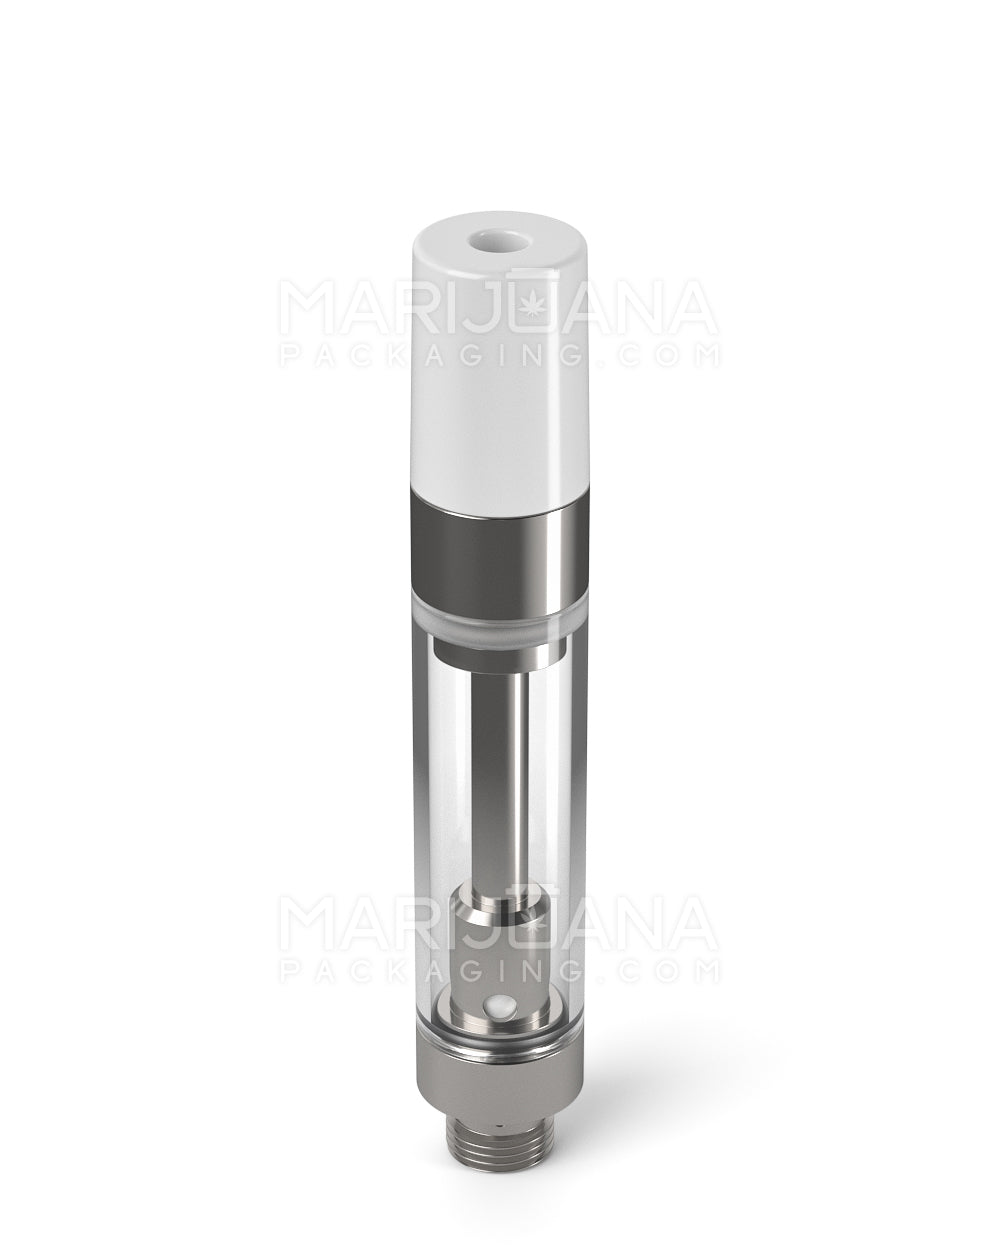 Ceramic Core Glass Vape Cartridge with Round White Plastic Mouthpiece | 1mL - Press On - 100 Count - 3